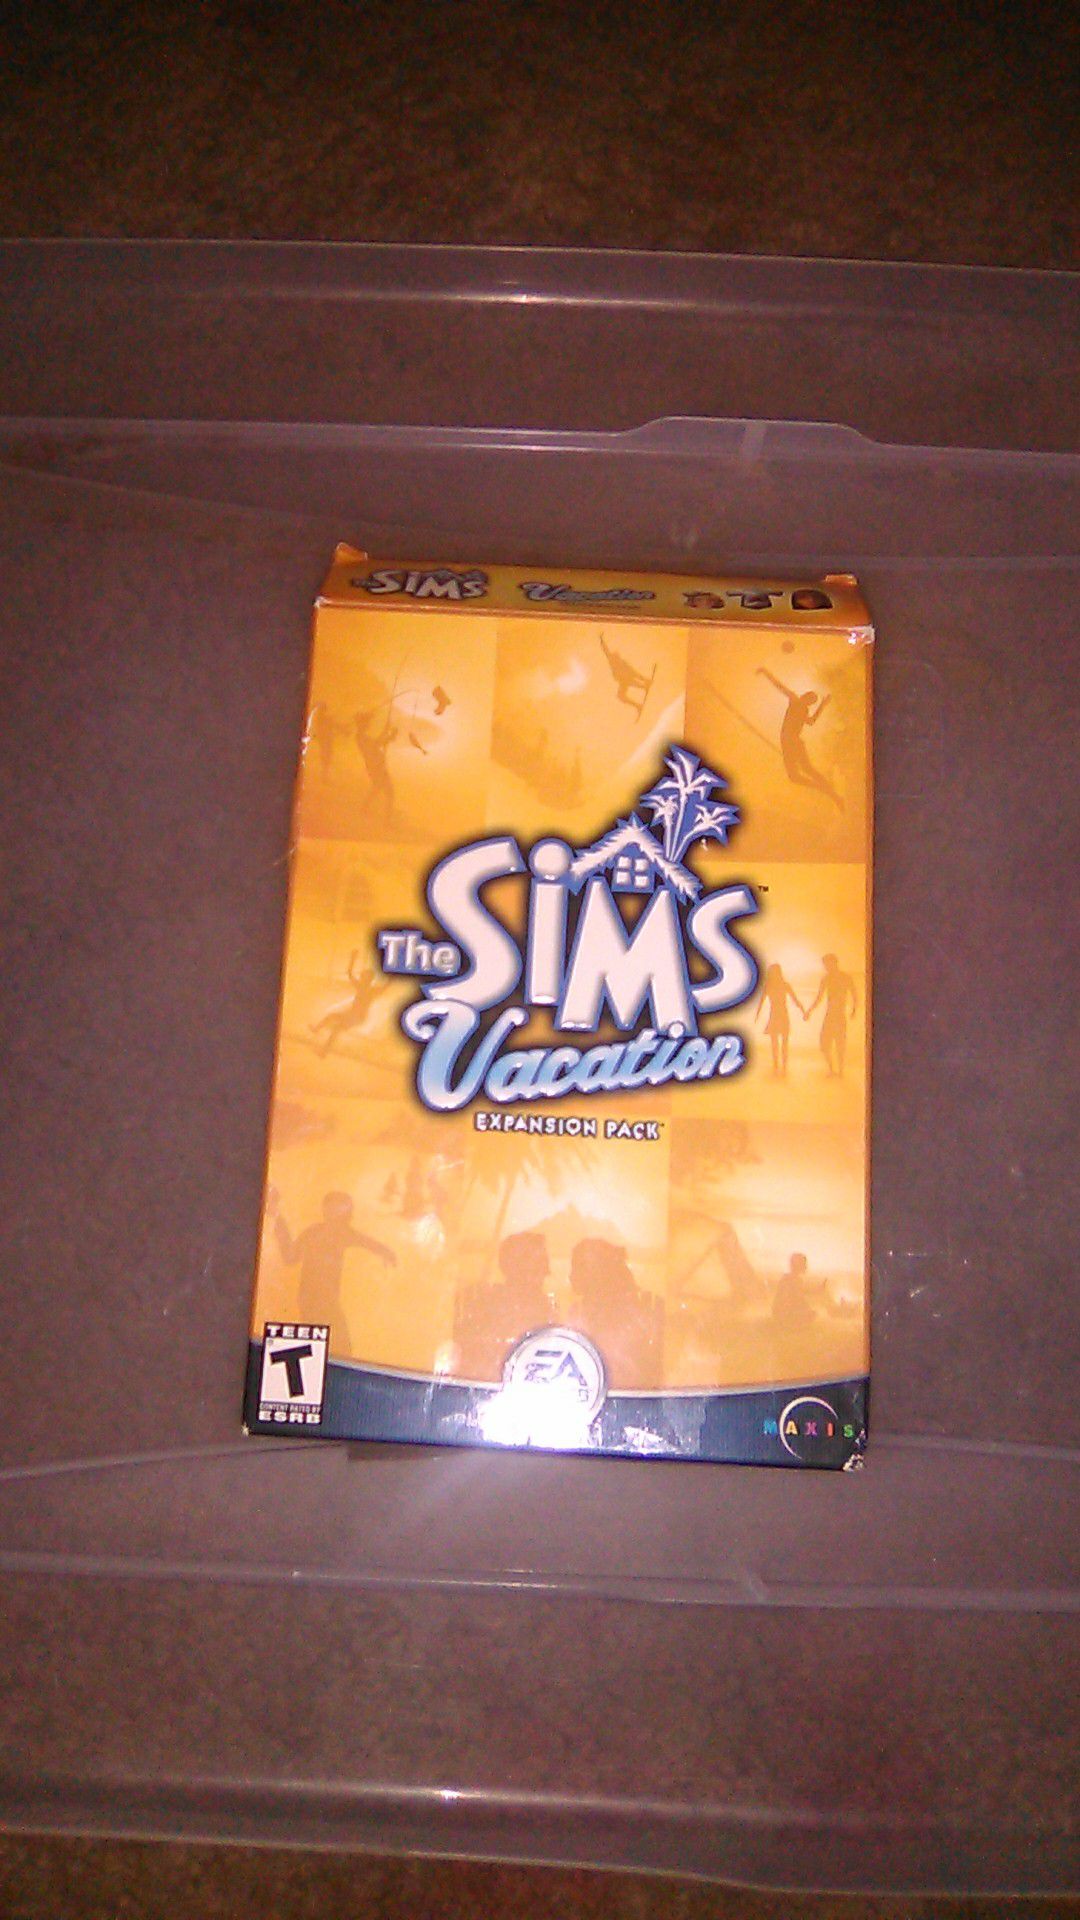 The Sims unleashed and Sims vacation